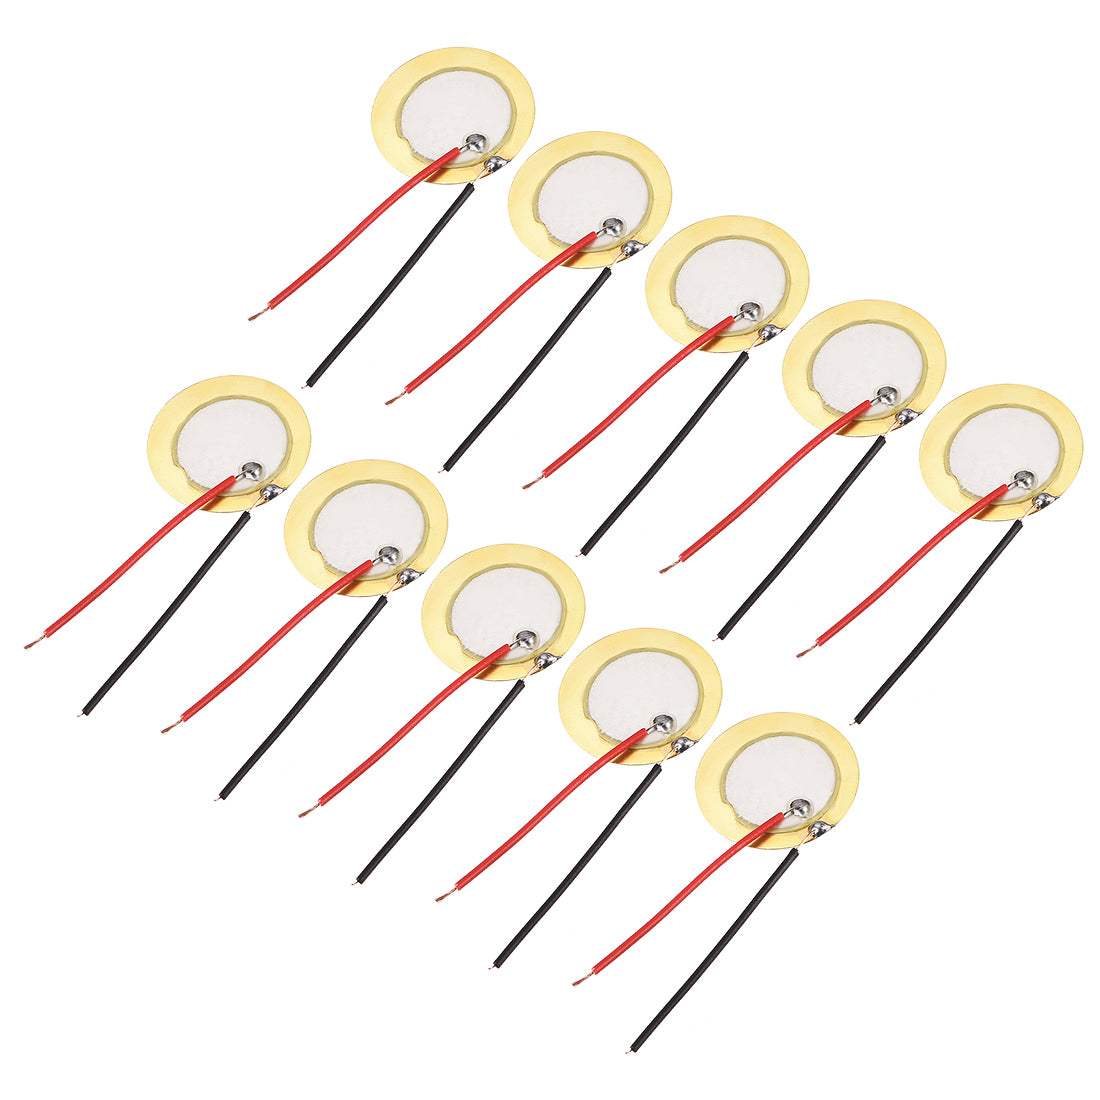 uxcell Uxcell 10 Pcs Piezo Discs 20mm Acoustic Pickup Transducer Prewired Microphone Trigger CBG Guitar